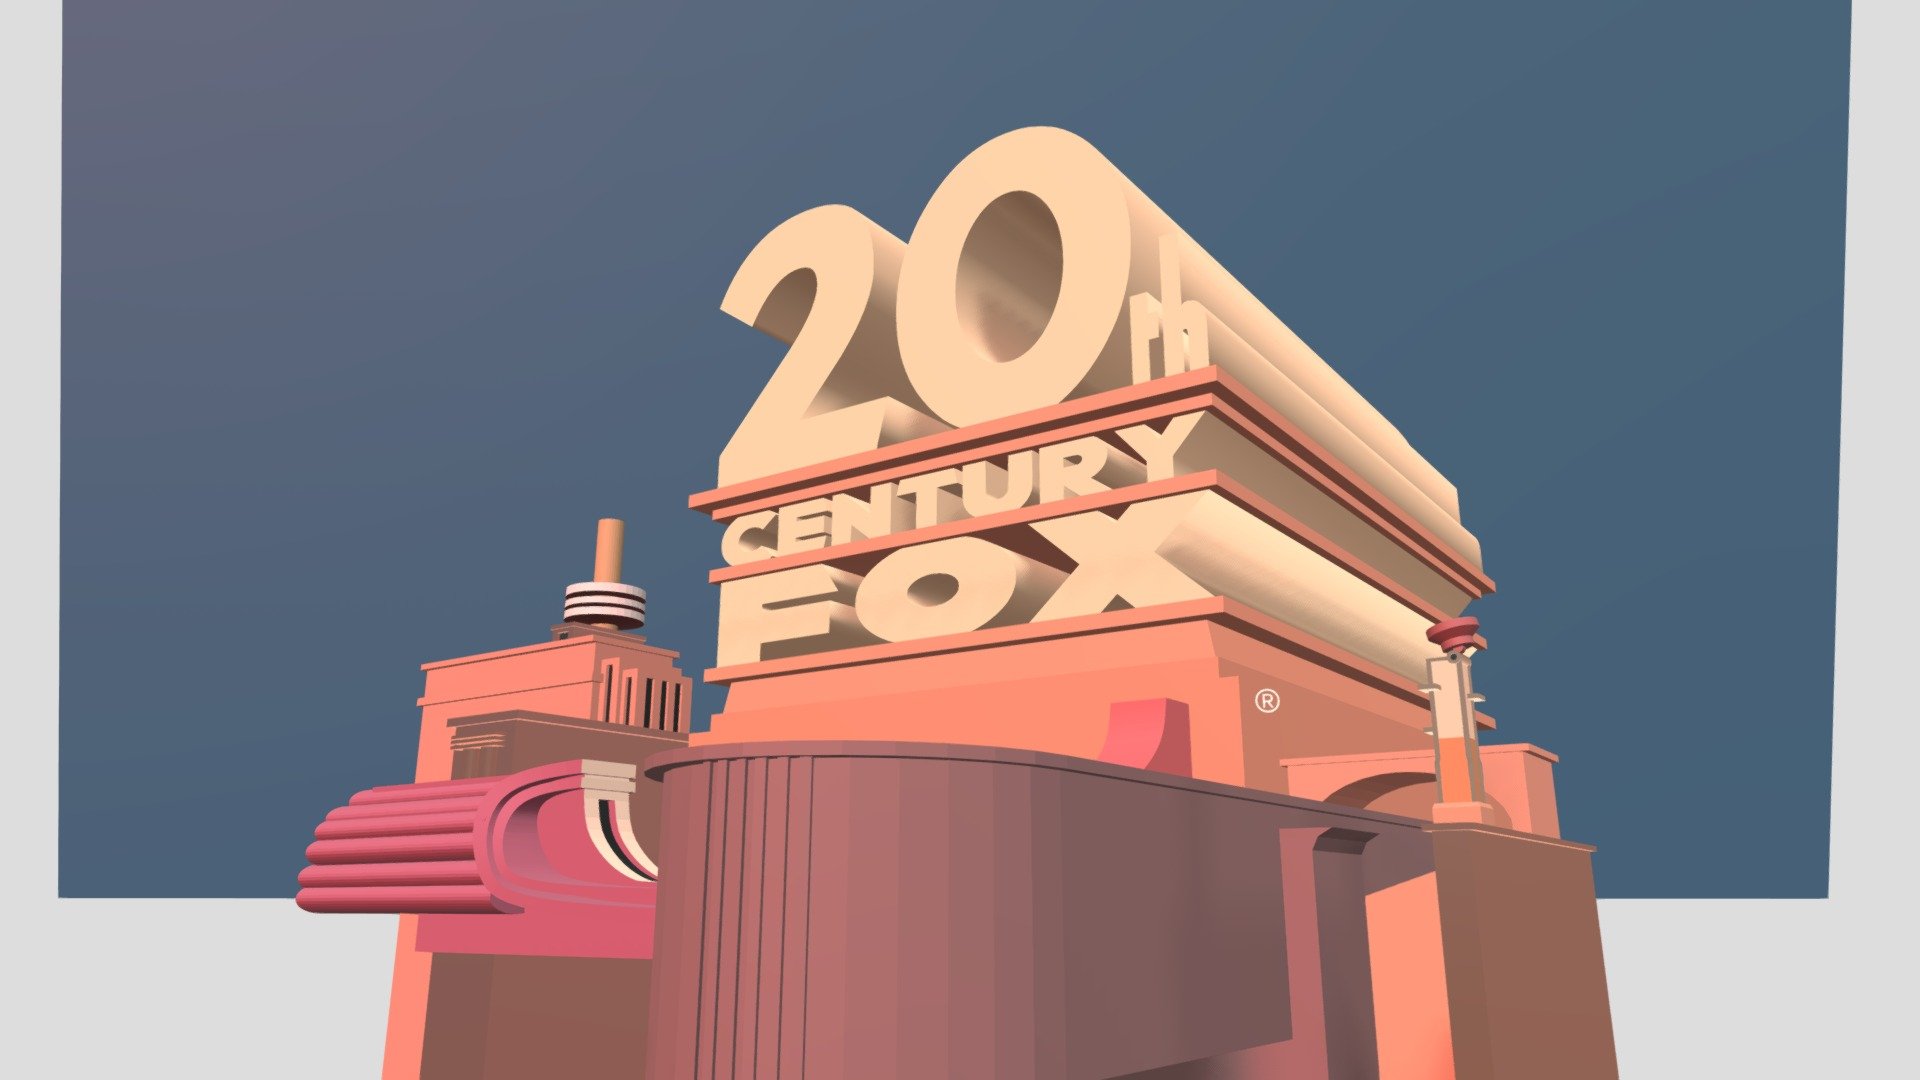 20th Century Fox (1981-1994) Logo - Download Free 3D model by  MikeyTheSketchfabUser (@Mikeyplanetearth) [8debf06]